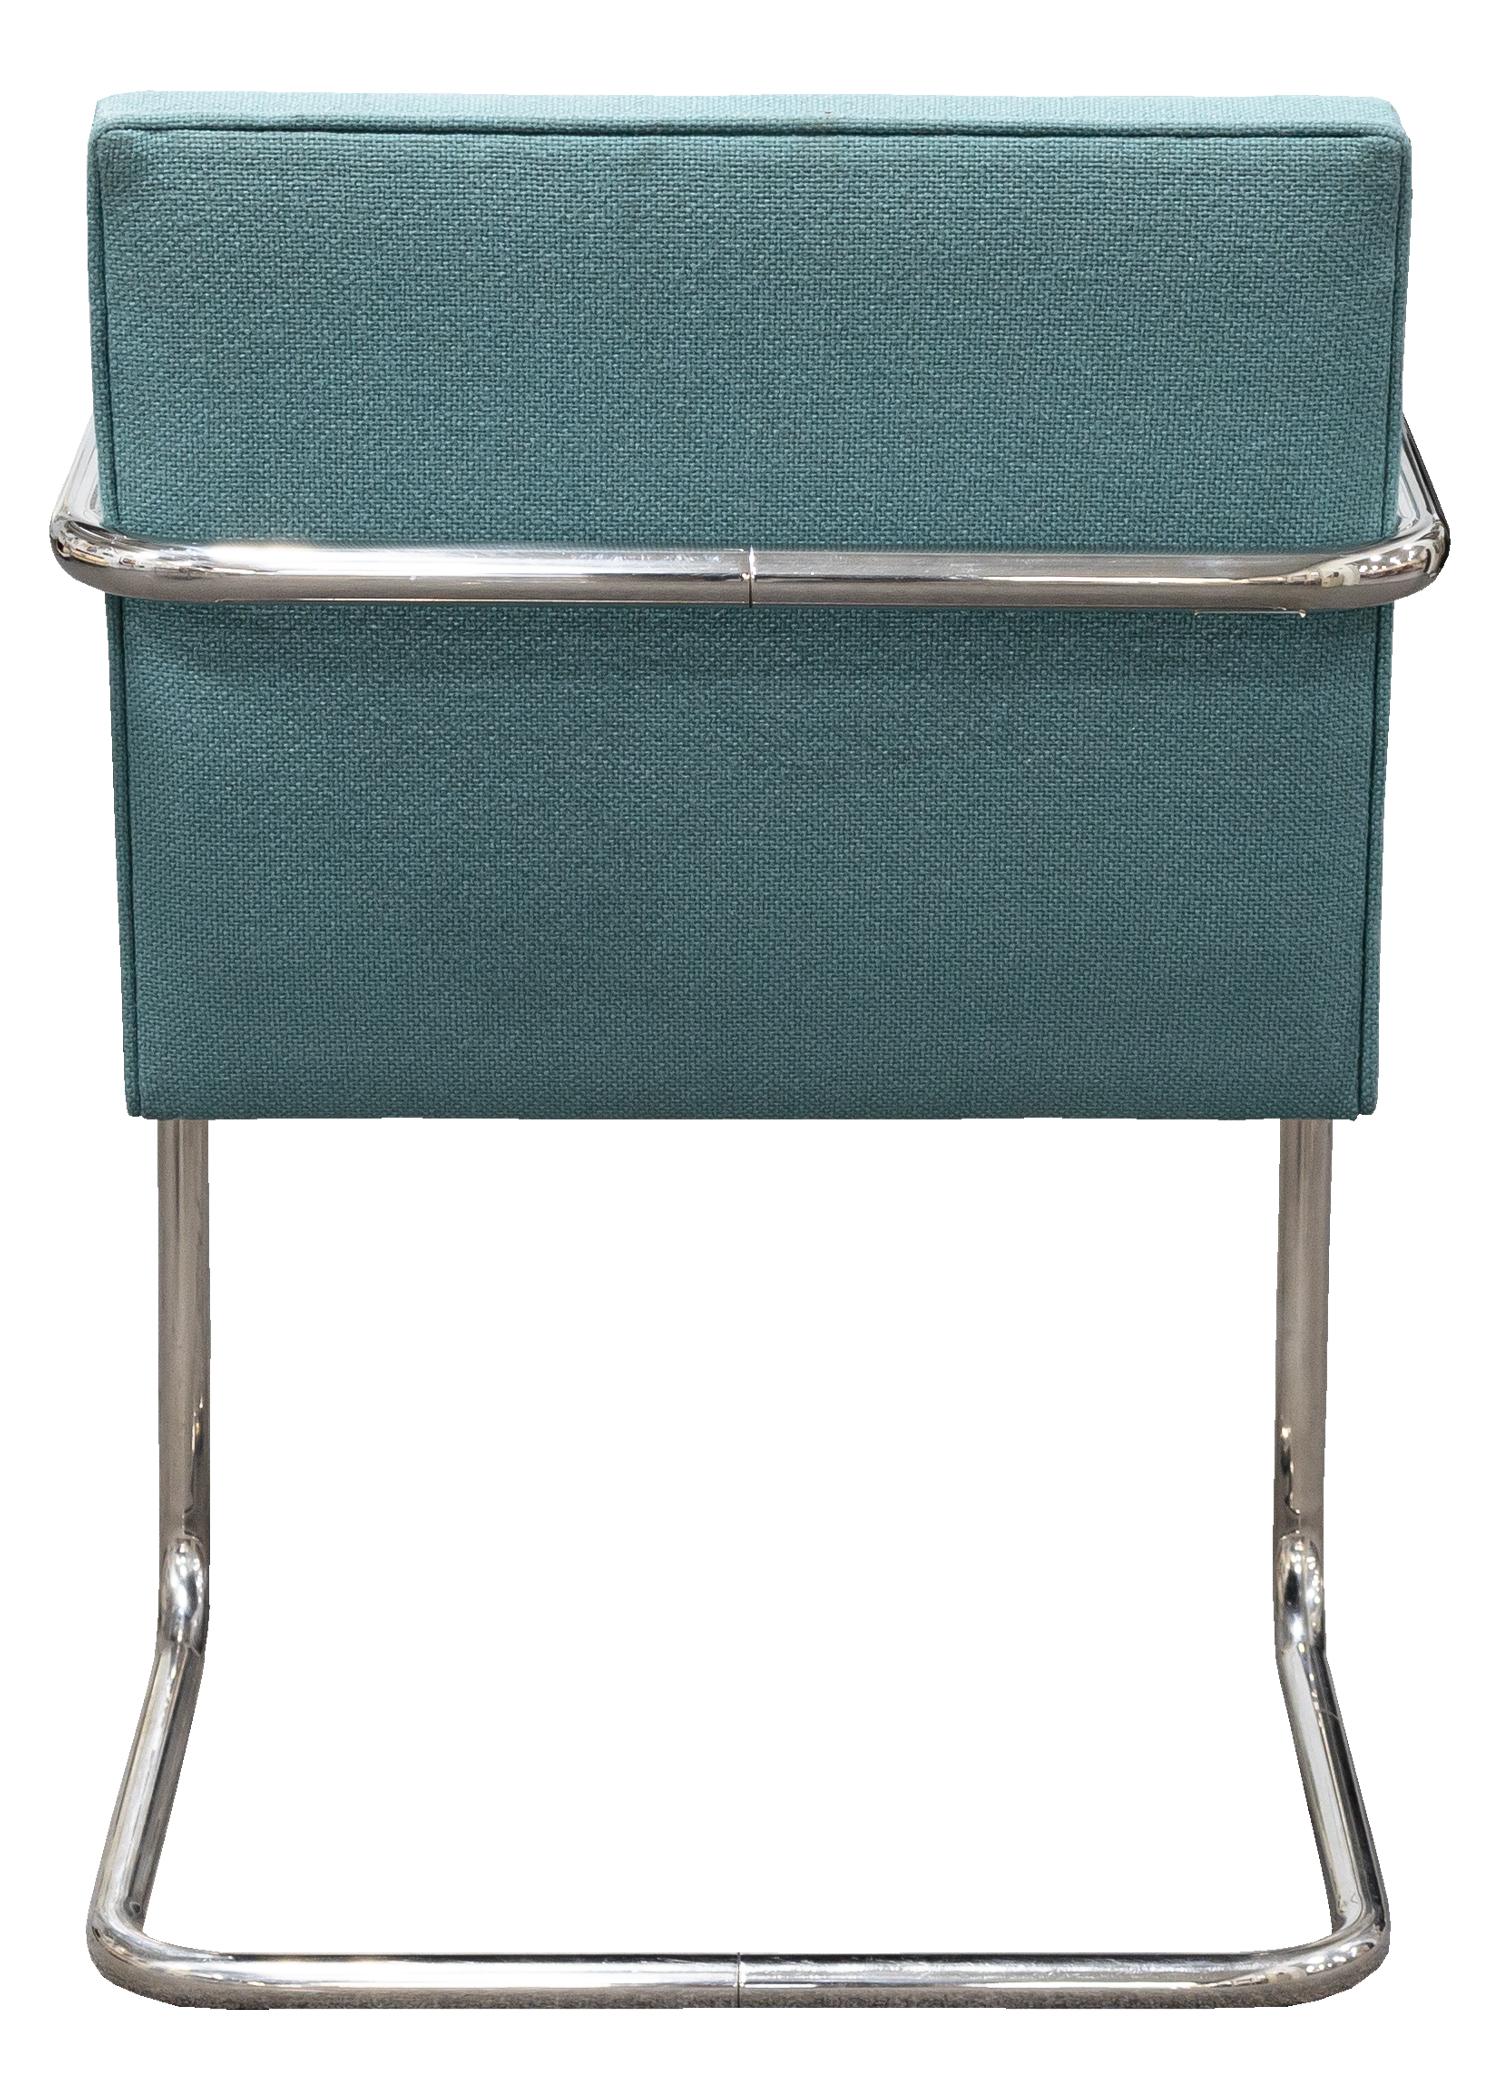 Thonet Set of 4 Tubular Steel Cantilever Modern Chairs Teal Upholstery Seating In Good Condition In Keego Harbor, MI